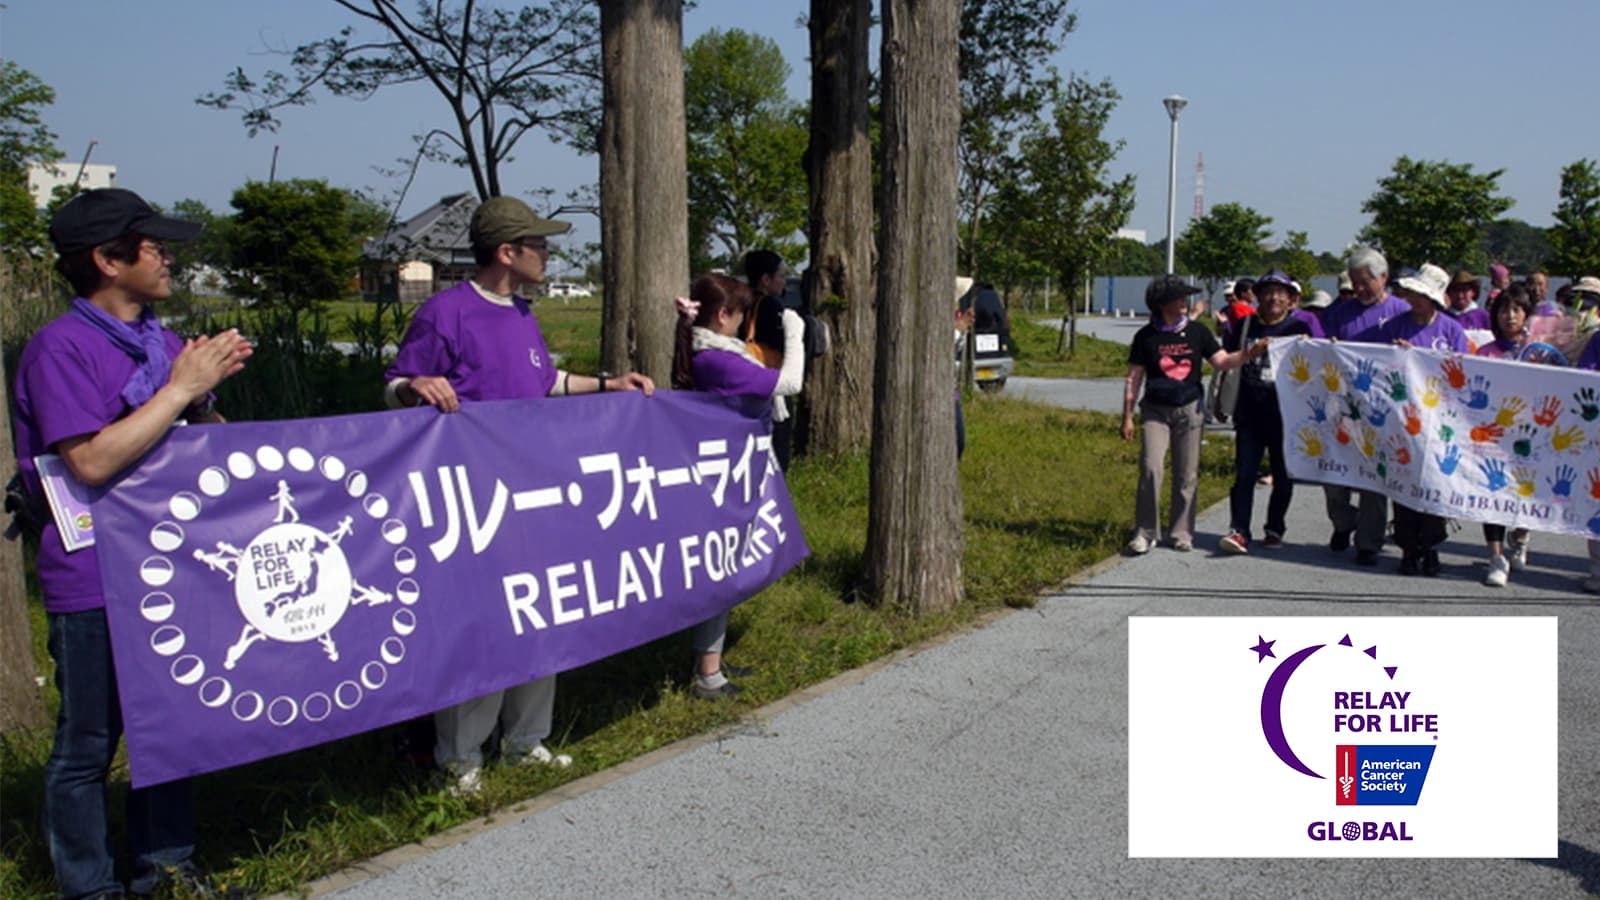 Two groups of people holding relay for life banners